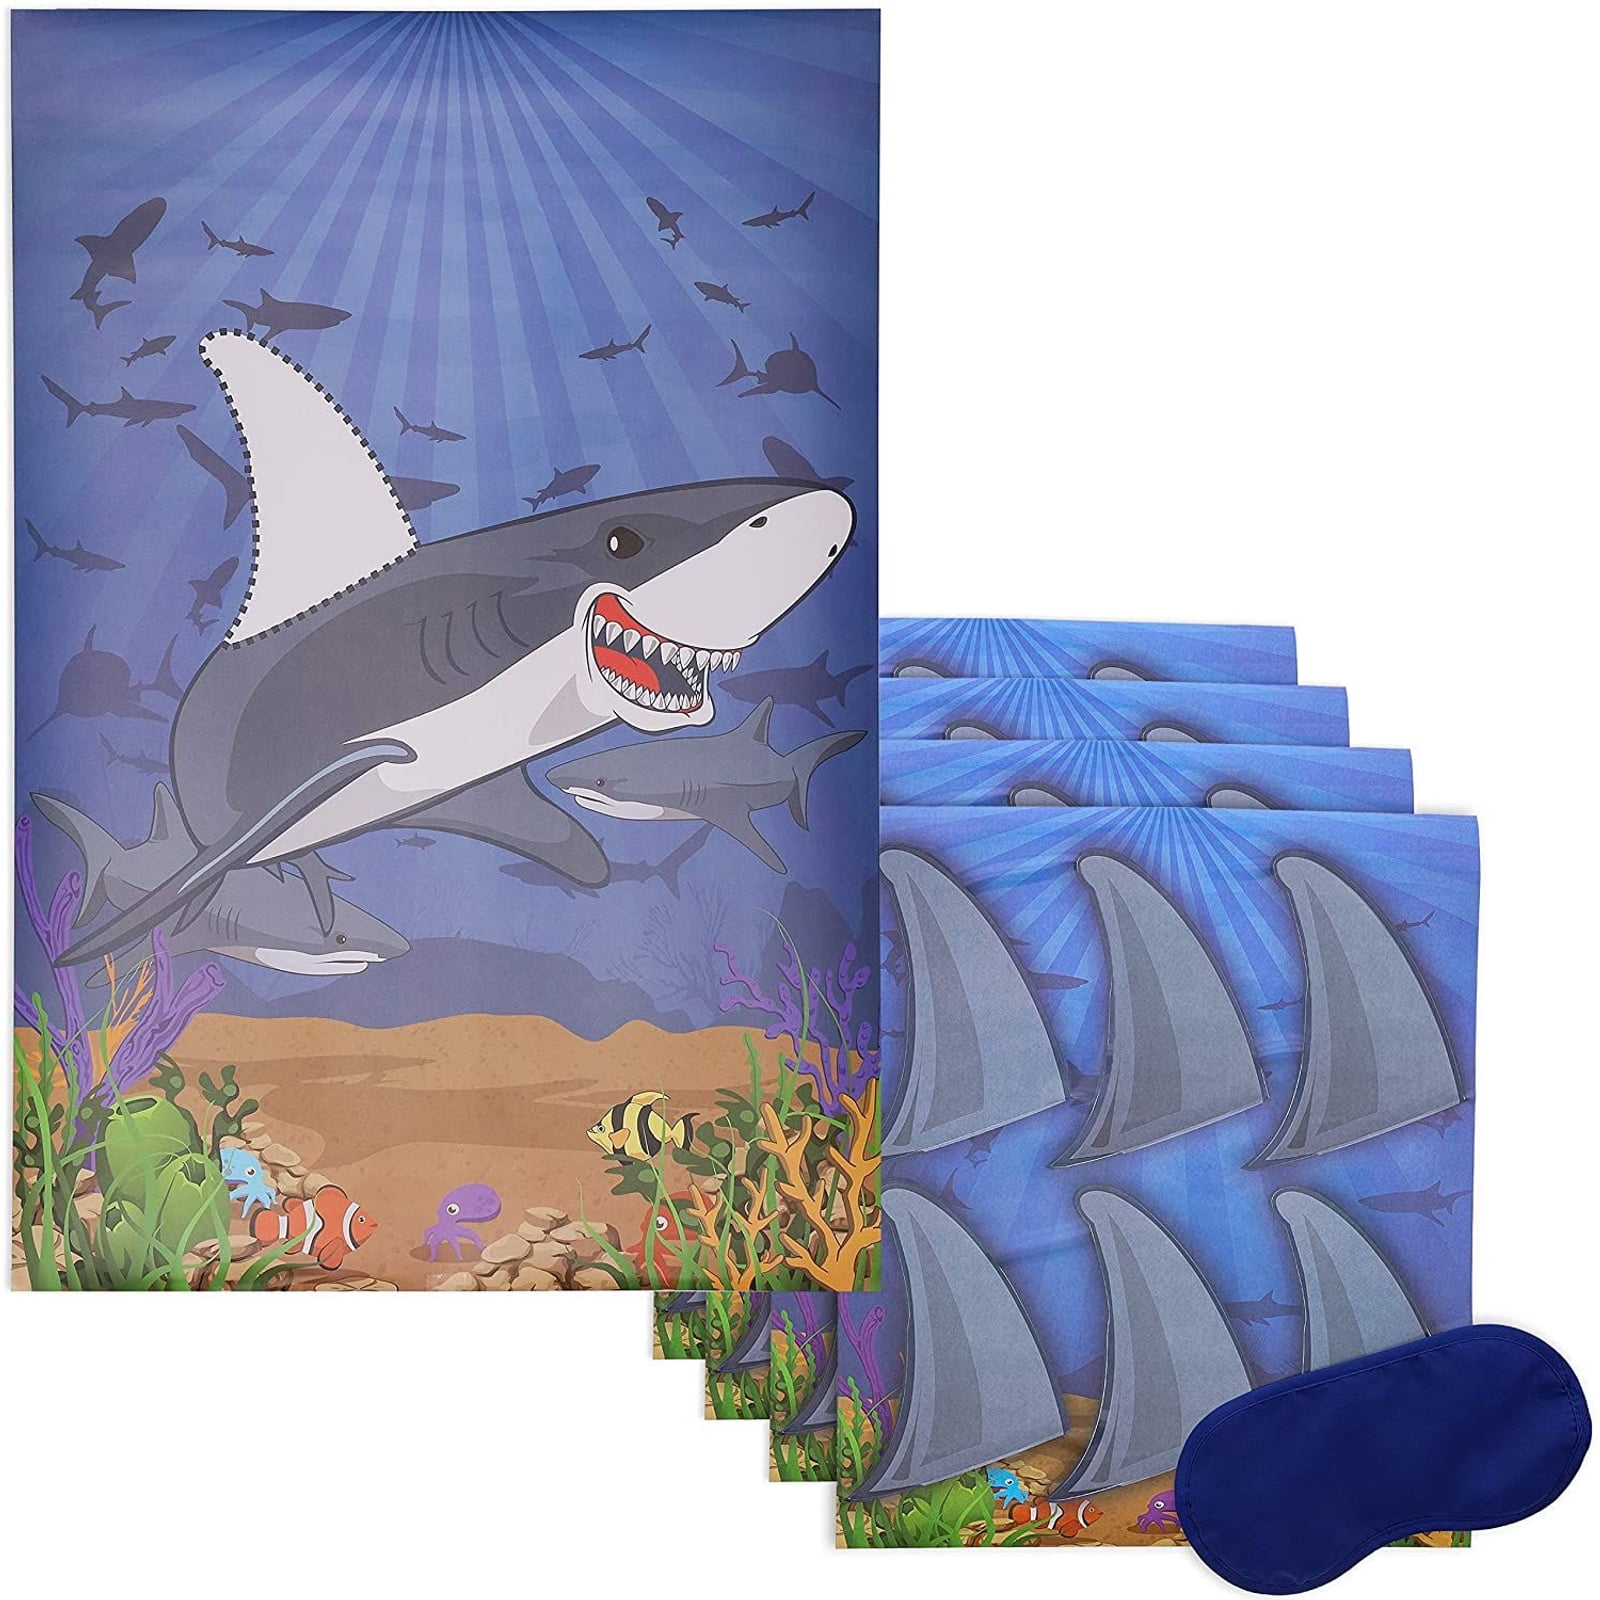 Pin The Fin On The Shark Party Games For Kids Birthday Party Supplies Baby Shark 